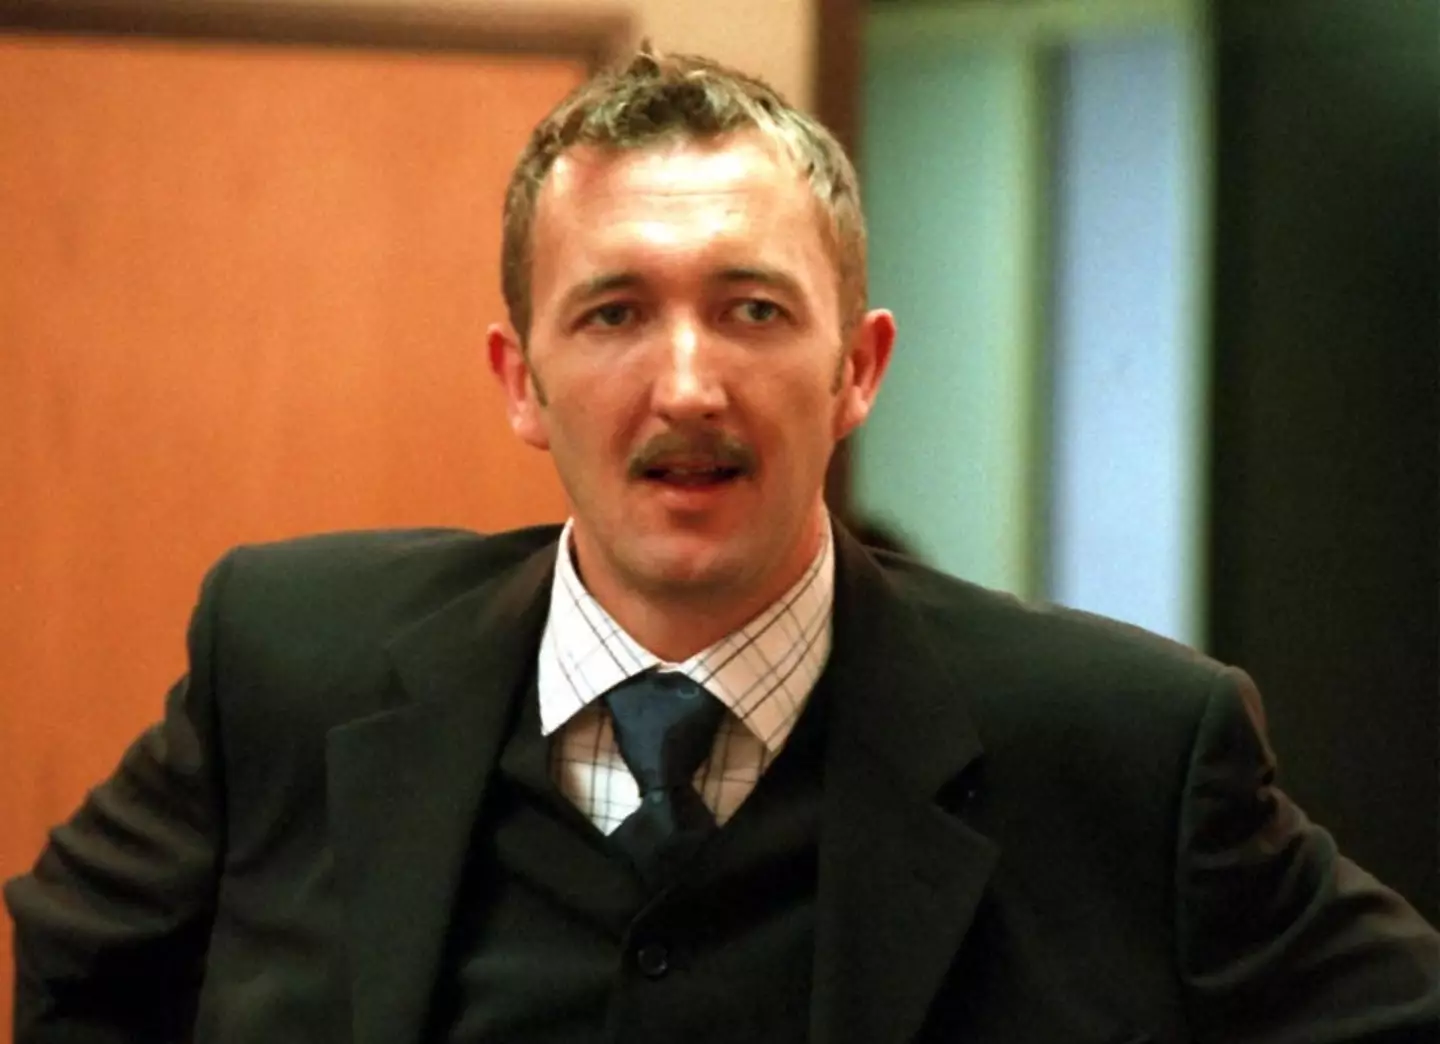 Ralph Ineson as Finchy in The Office.